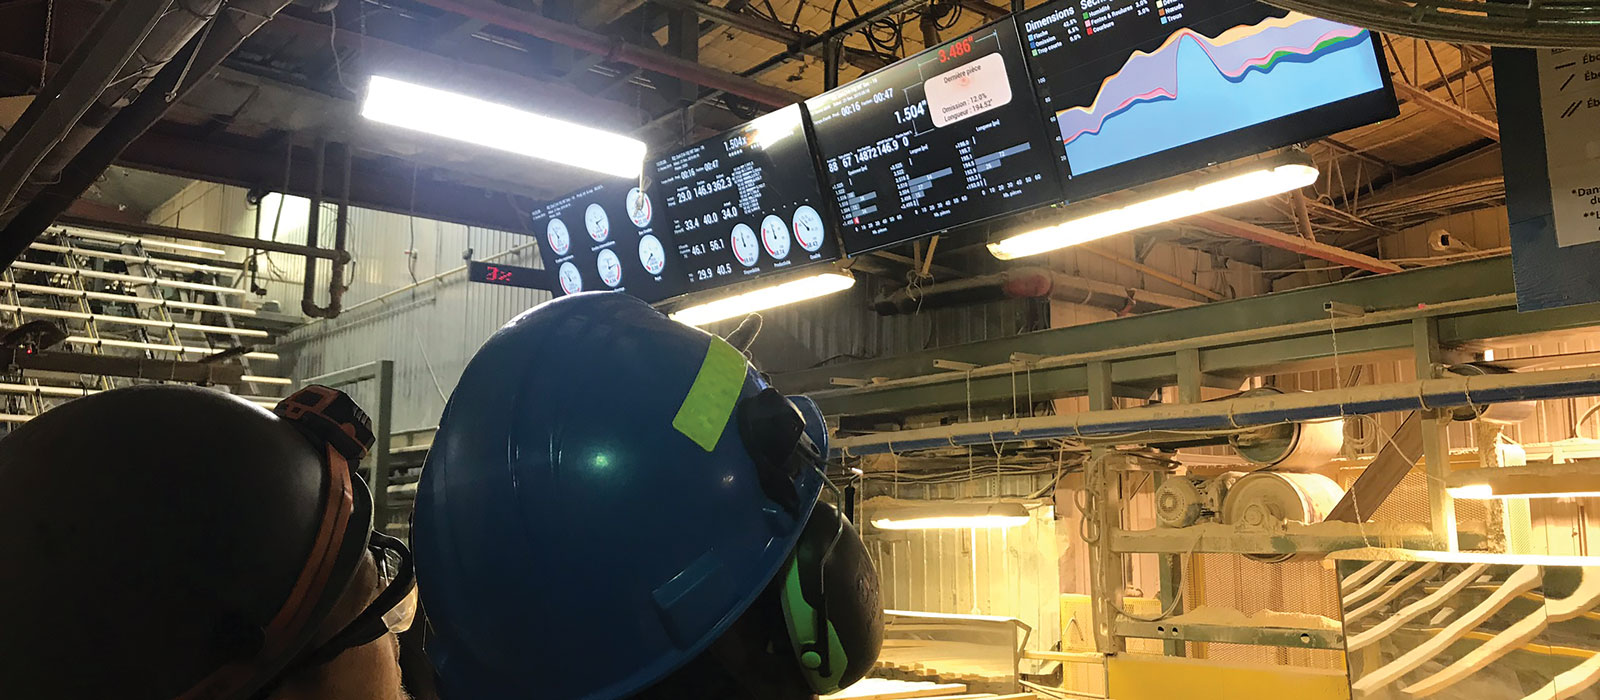 Mill workers consulting PMP TeamMate dashboards on the planer mill floor